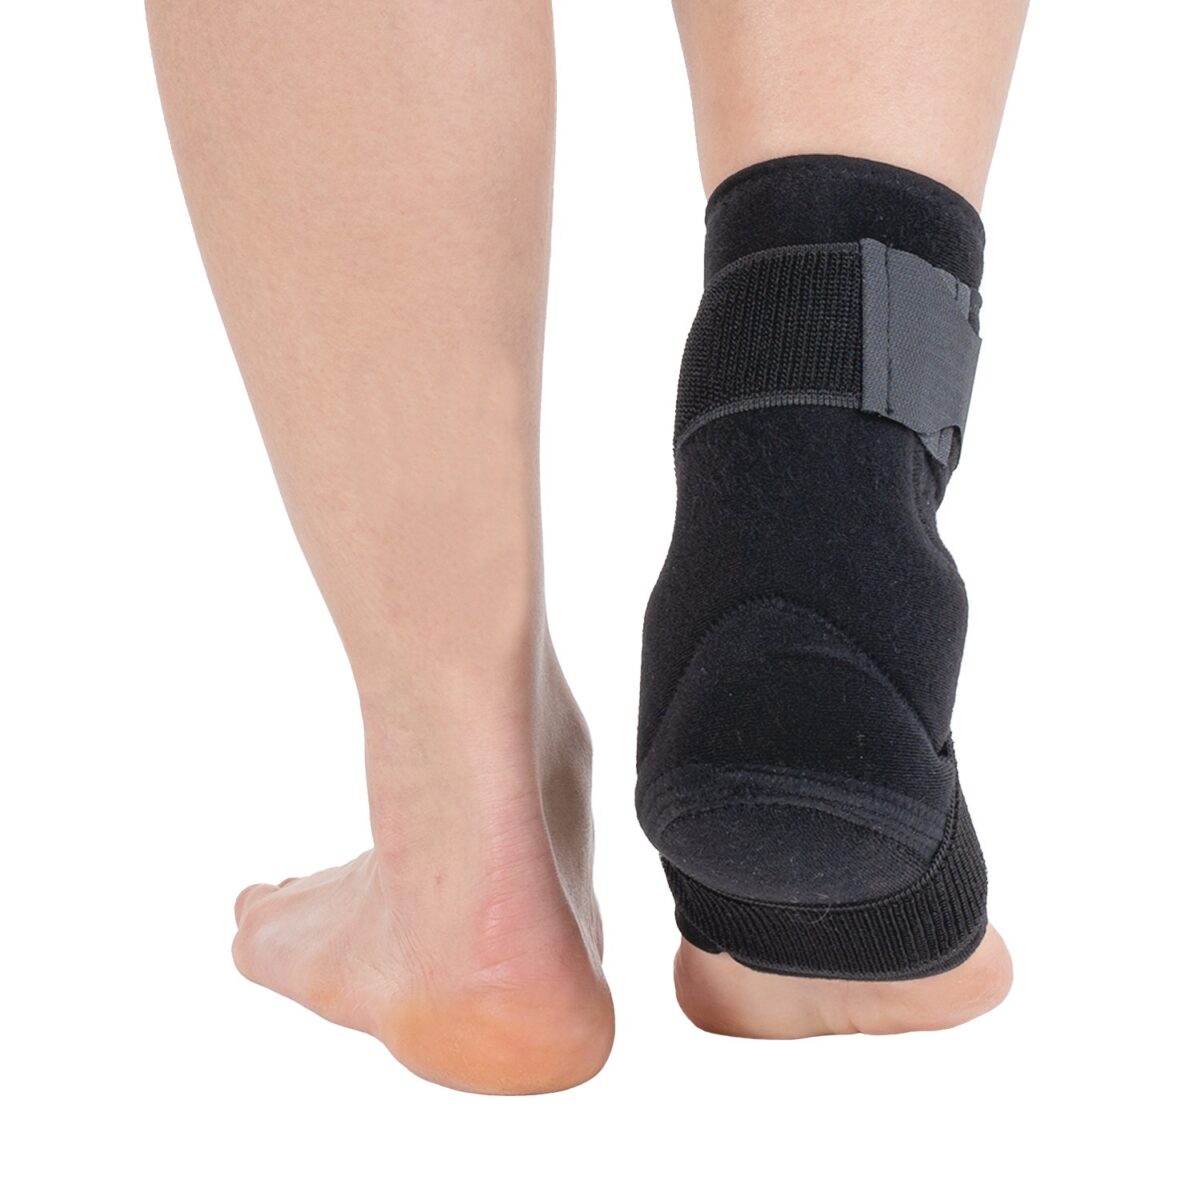 wingmed orthopedic equipments W607 achilles tendon ankle support with 8 strap 53 1 1